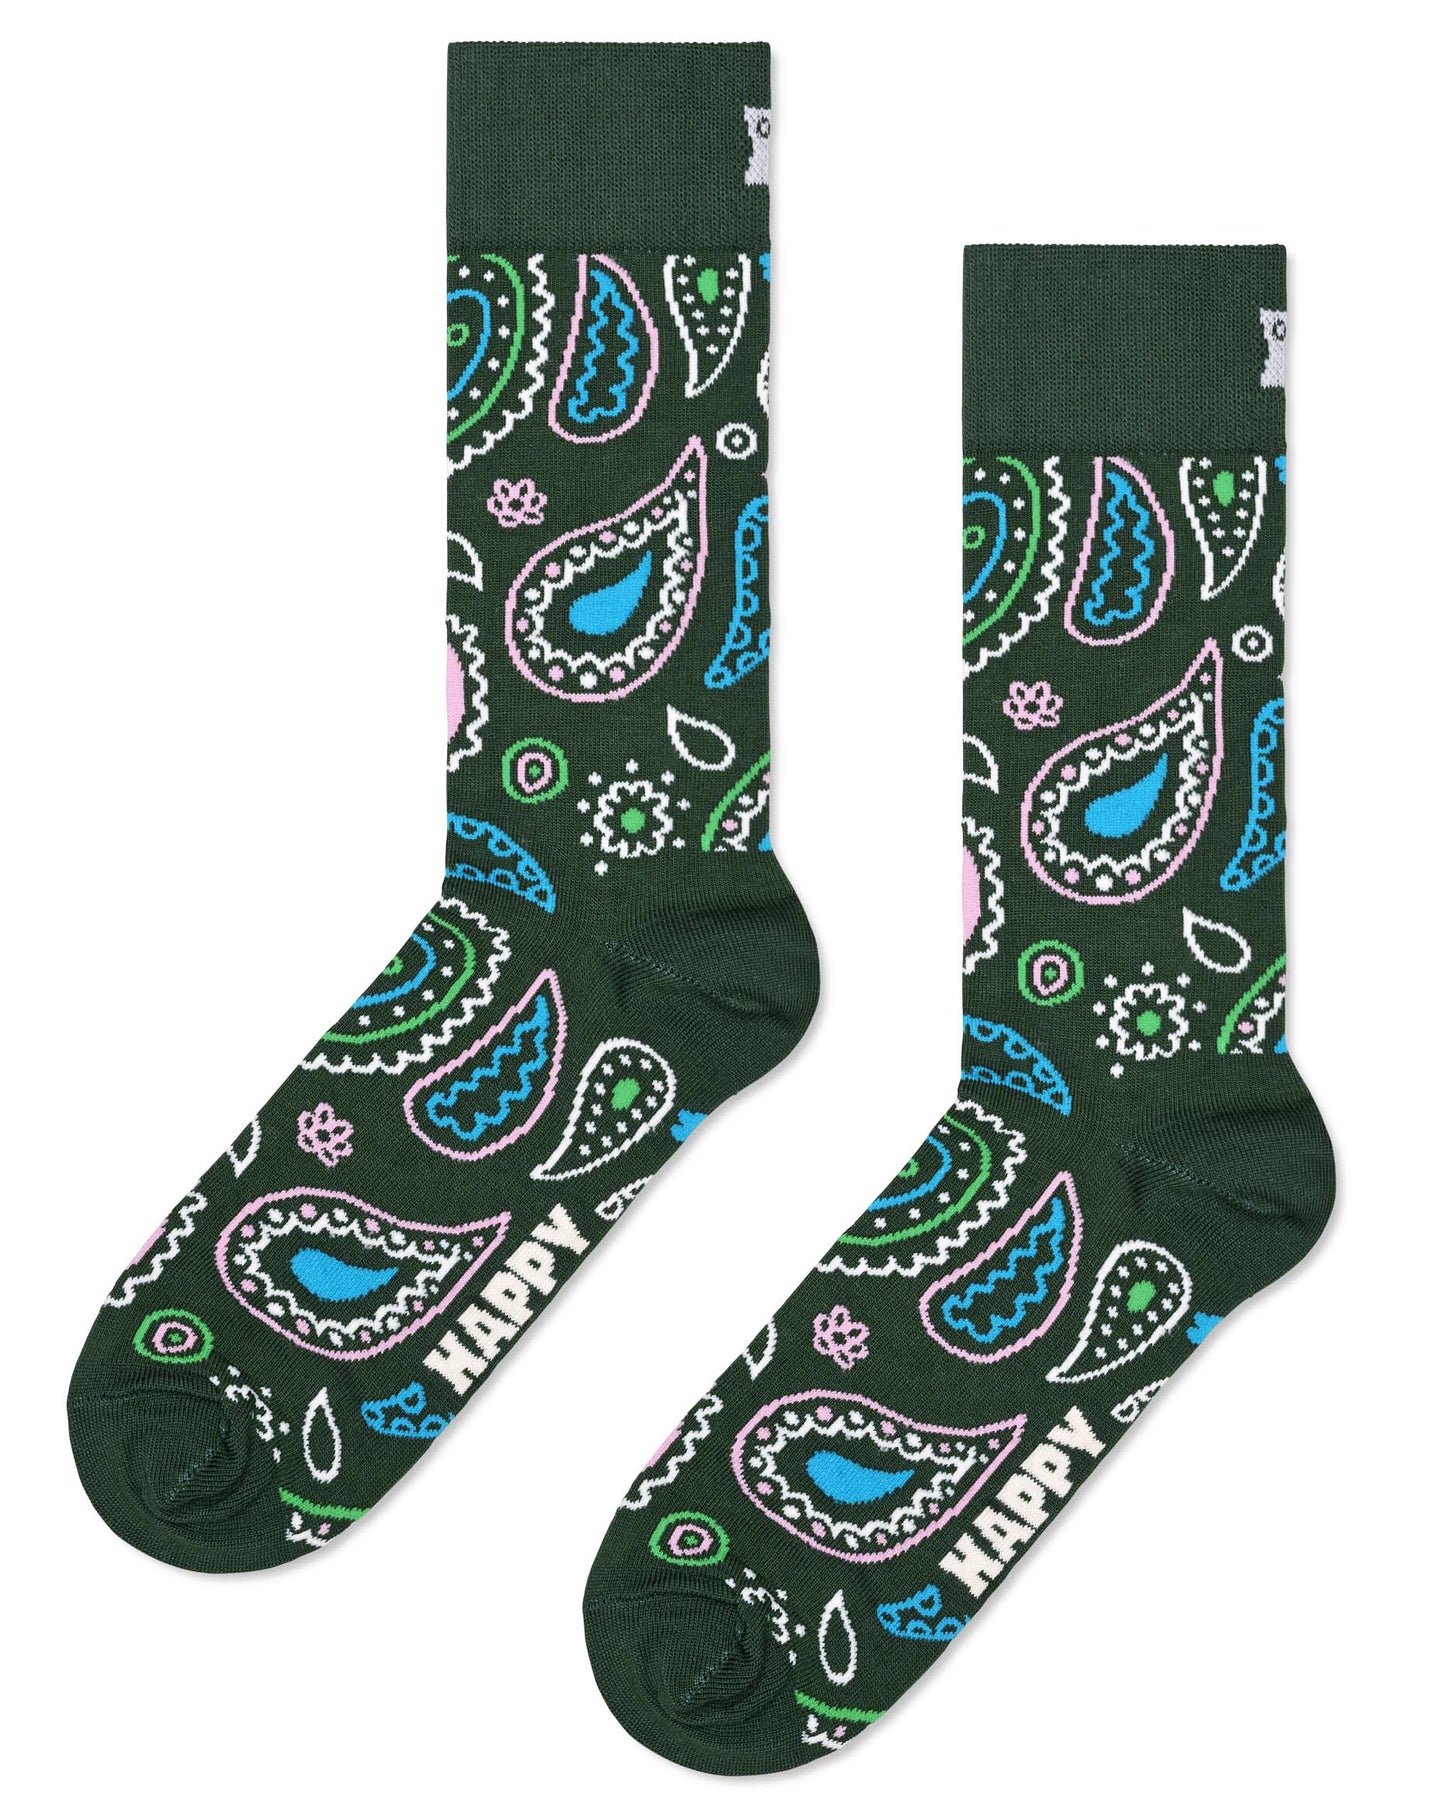 Happy Socks P000086 Paisley Sock - Khaki green cotton crew socks with a paisley style pattern in light shades of blue, pink, green and cream.